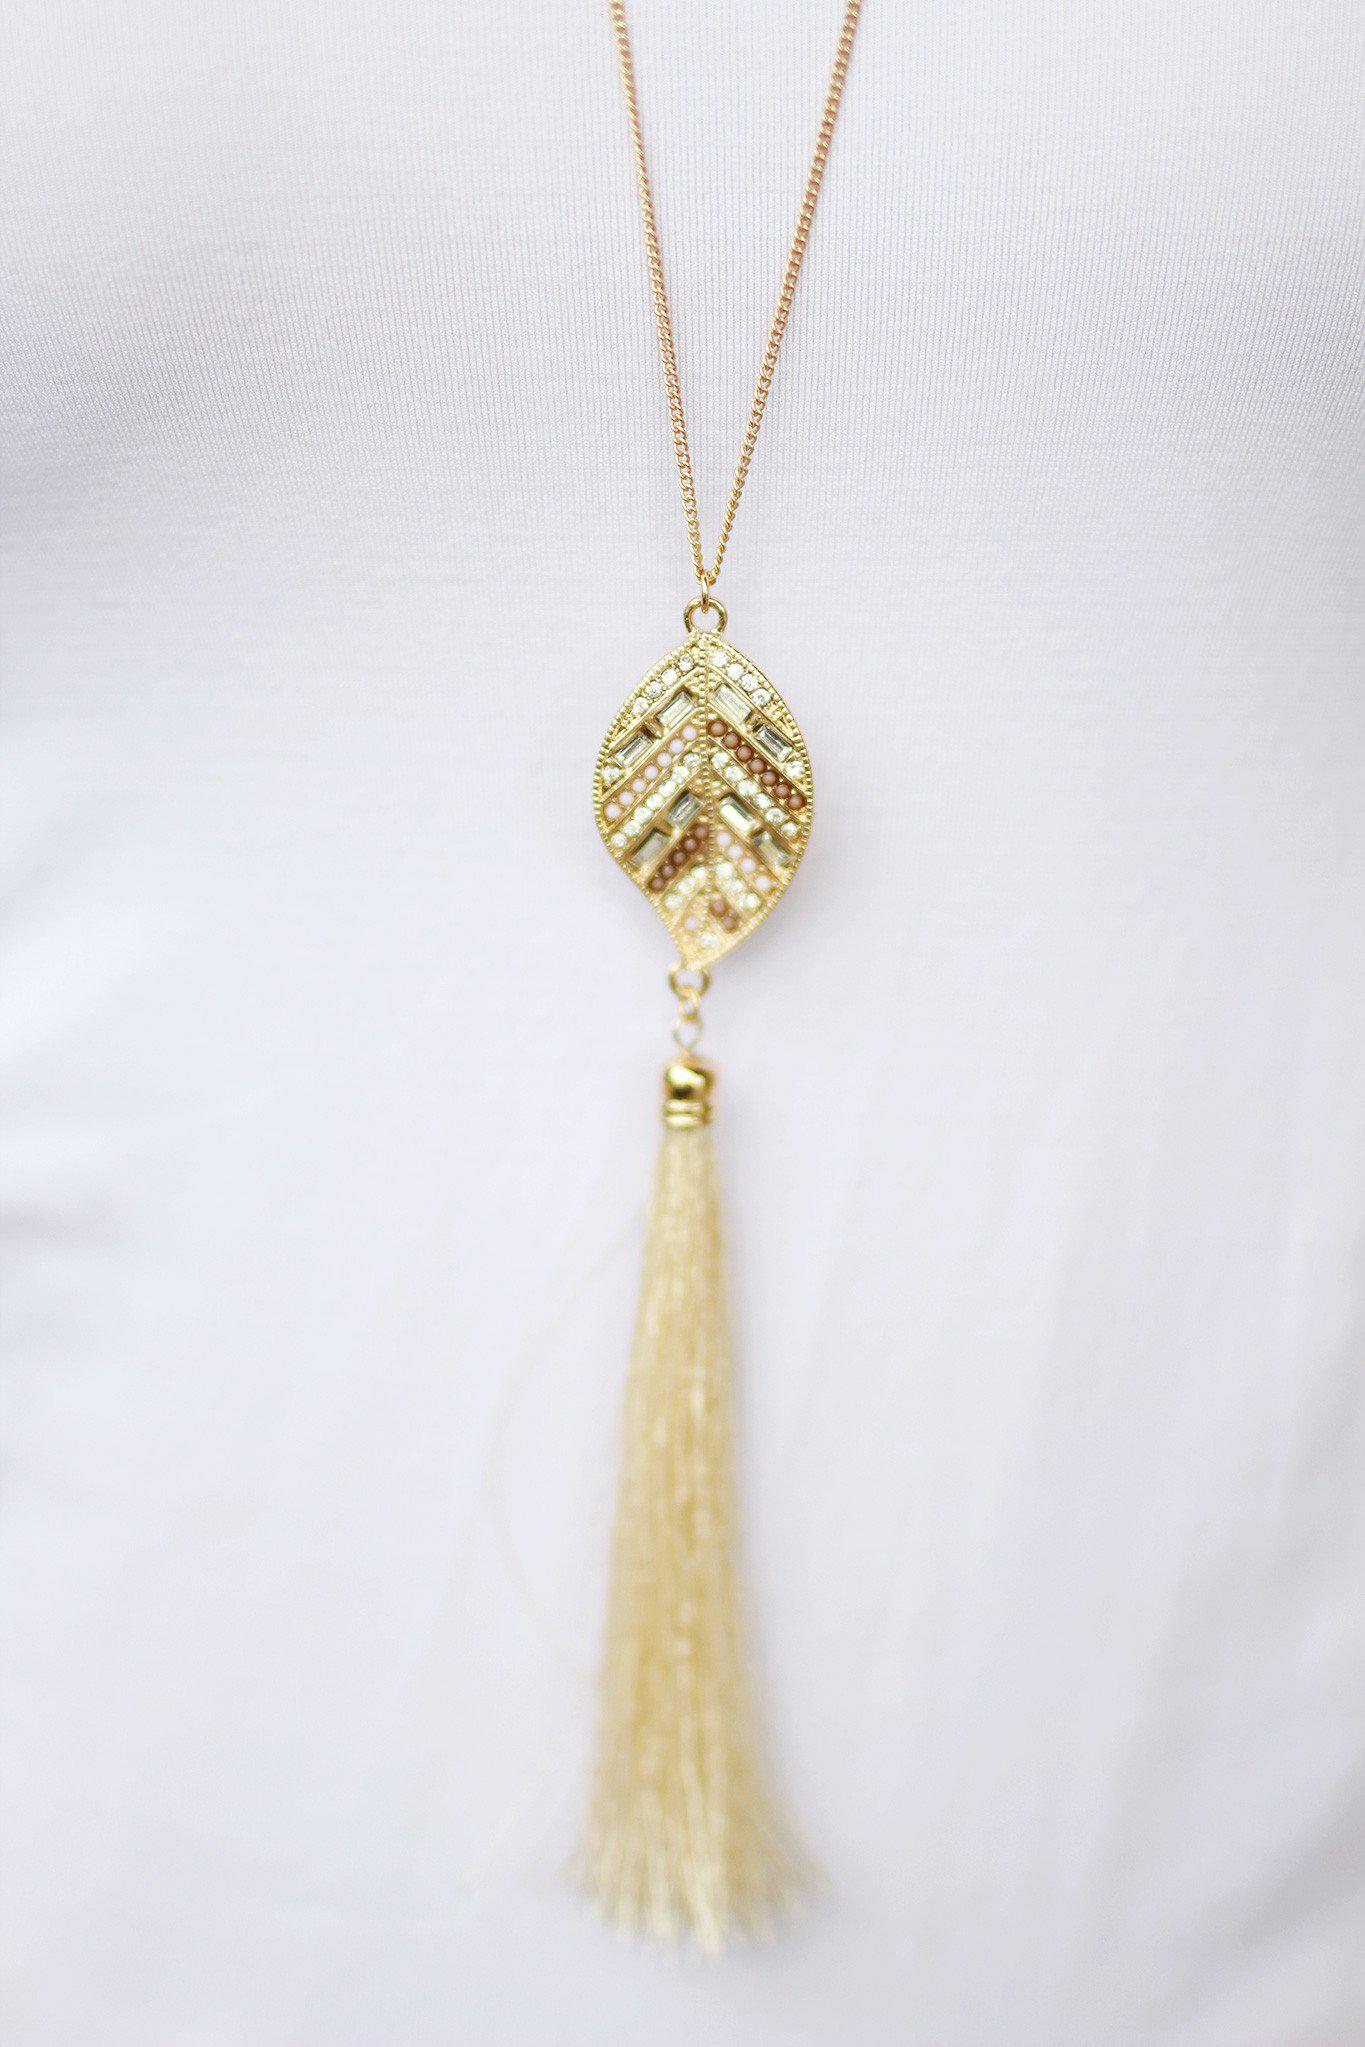 Gold Ivory Leaf Necklace with Tassel